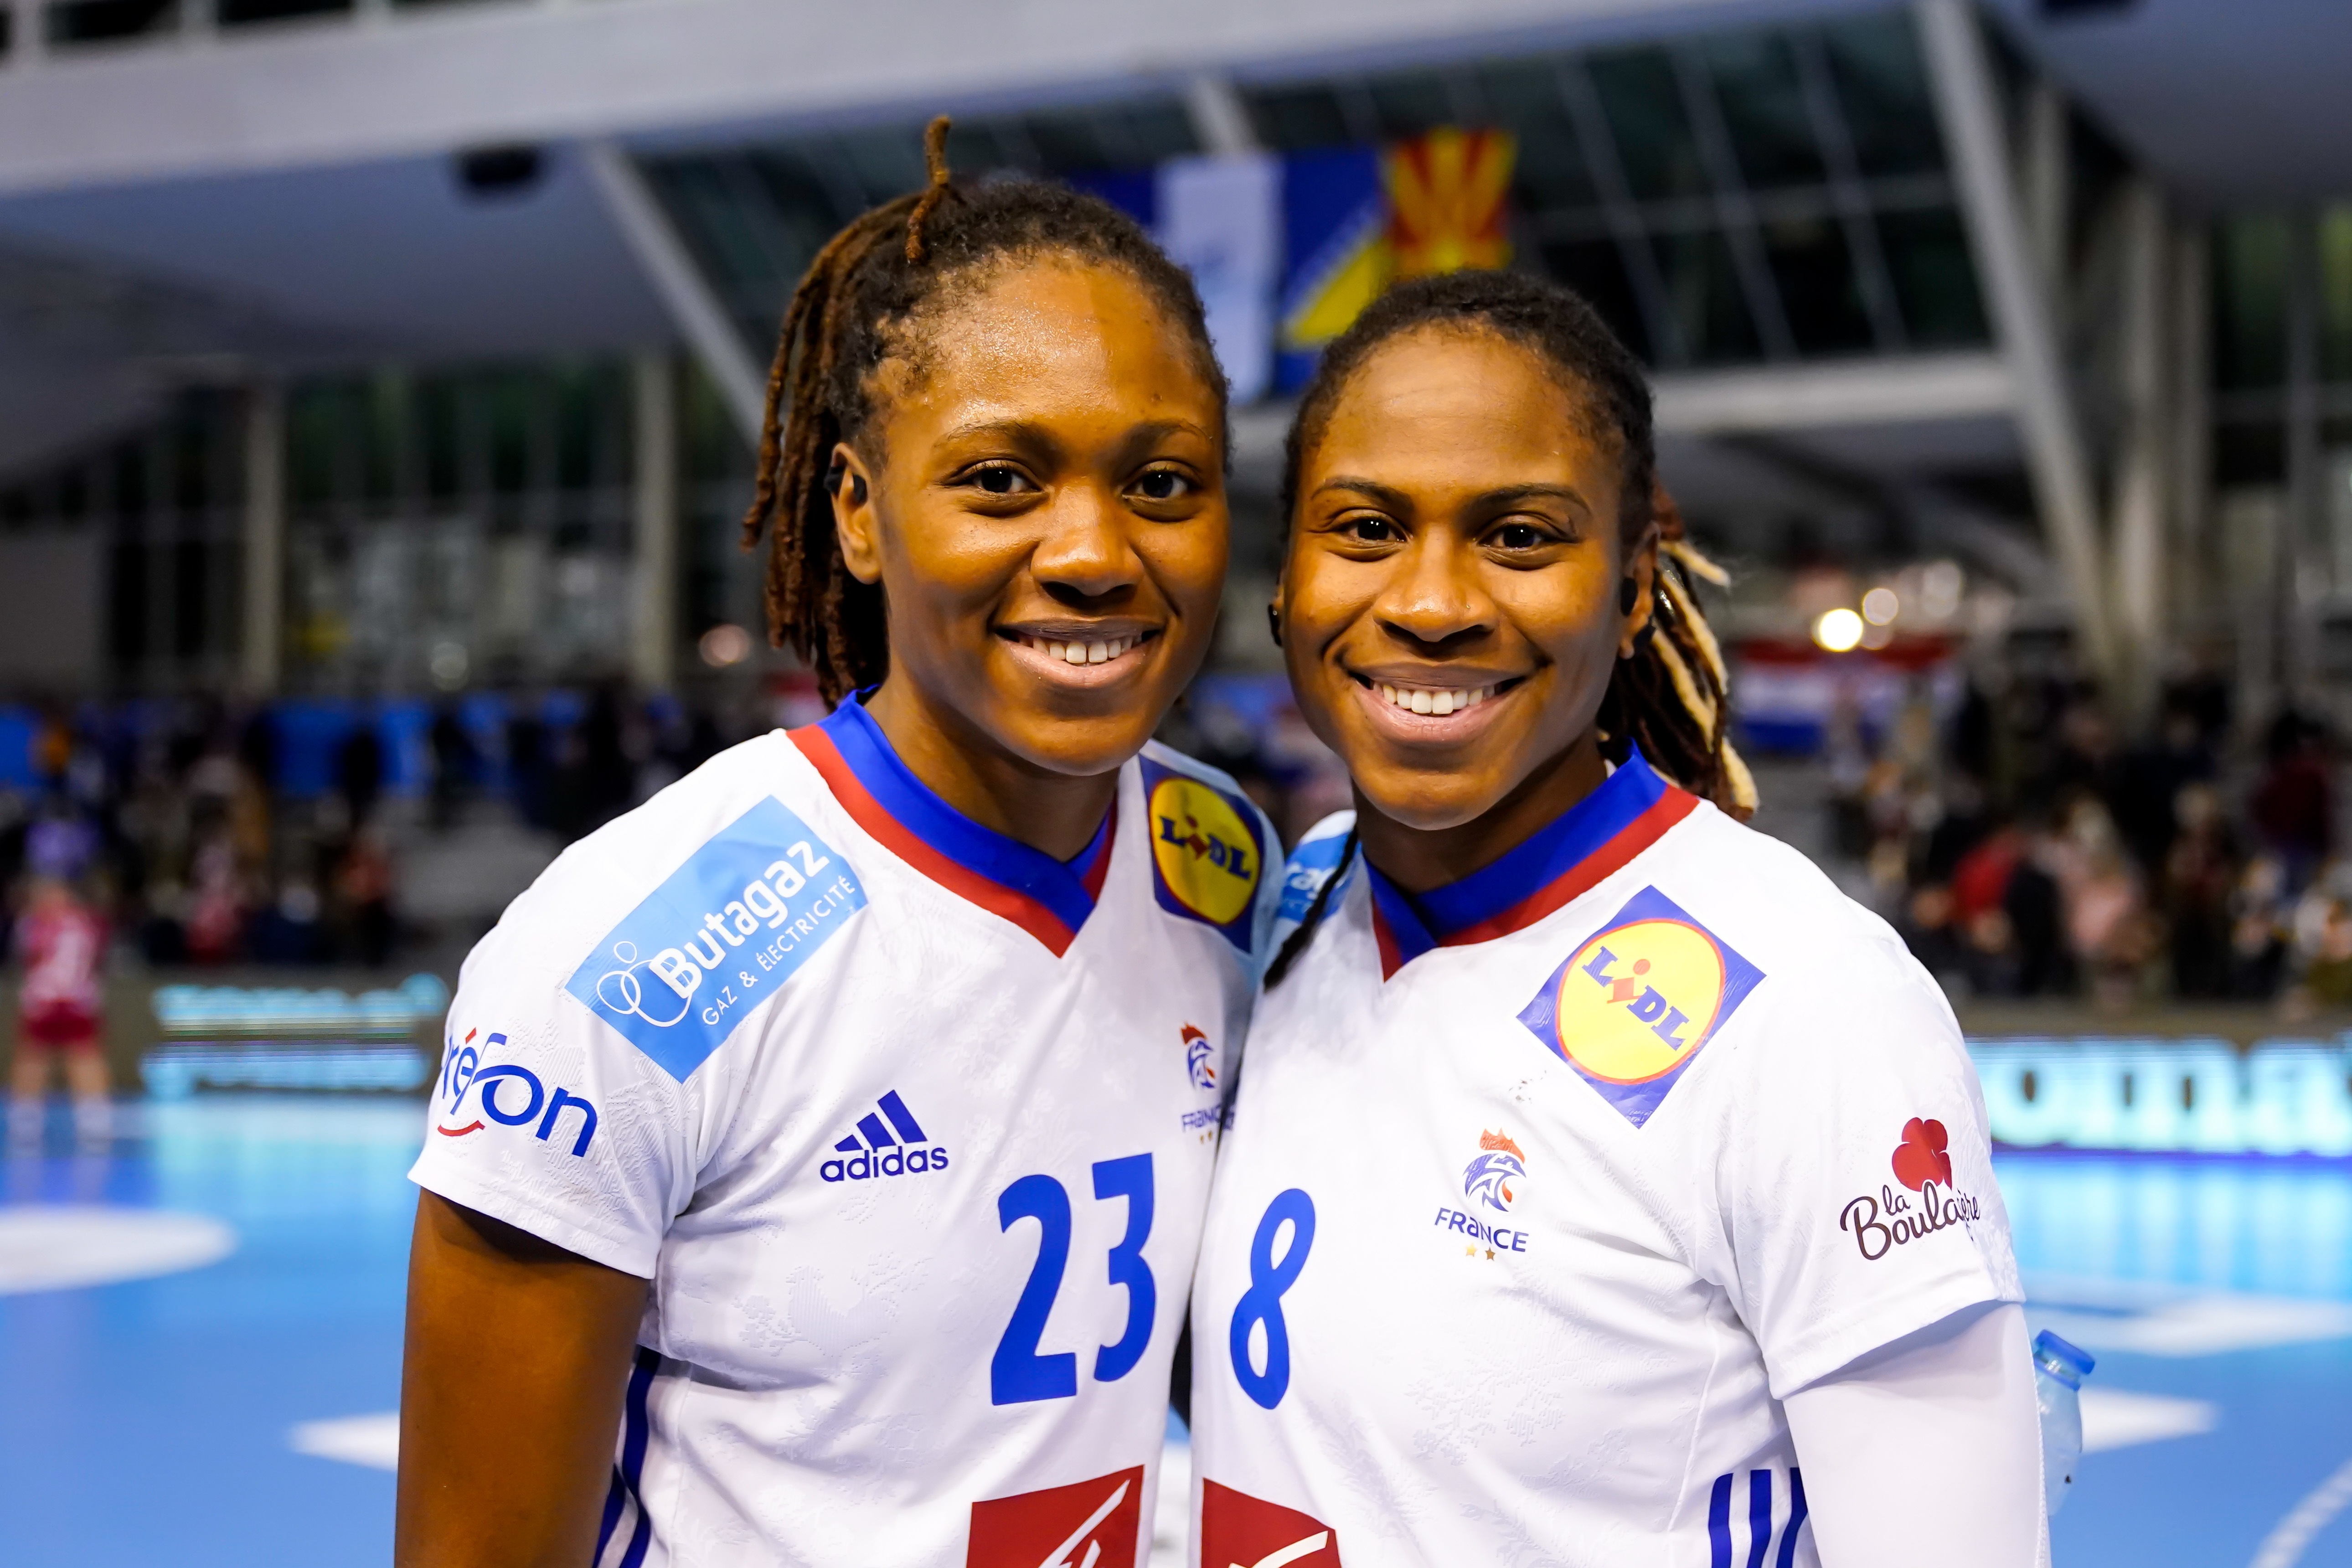 Deborah LASSOURCE of France and Coralie LASSOURCE of France during the women's EHF Euro 2022 Qualifying match between Croatia and France on March 3, 2022 in Koprivnica, Croatia. (Photo by Hugo Pfeiffer/Icon Sport)